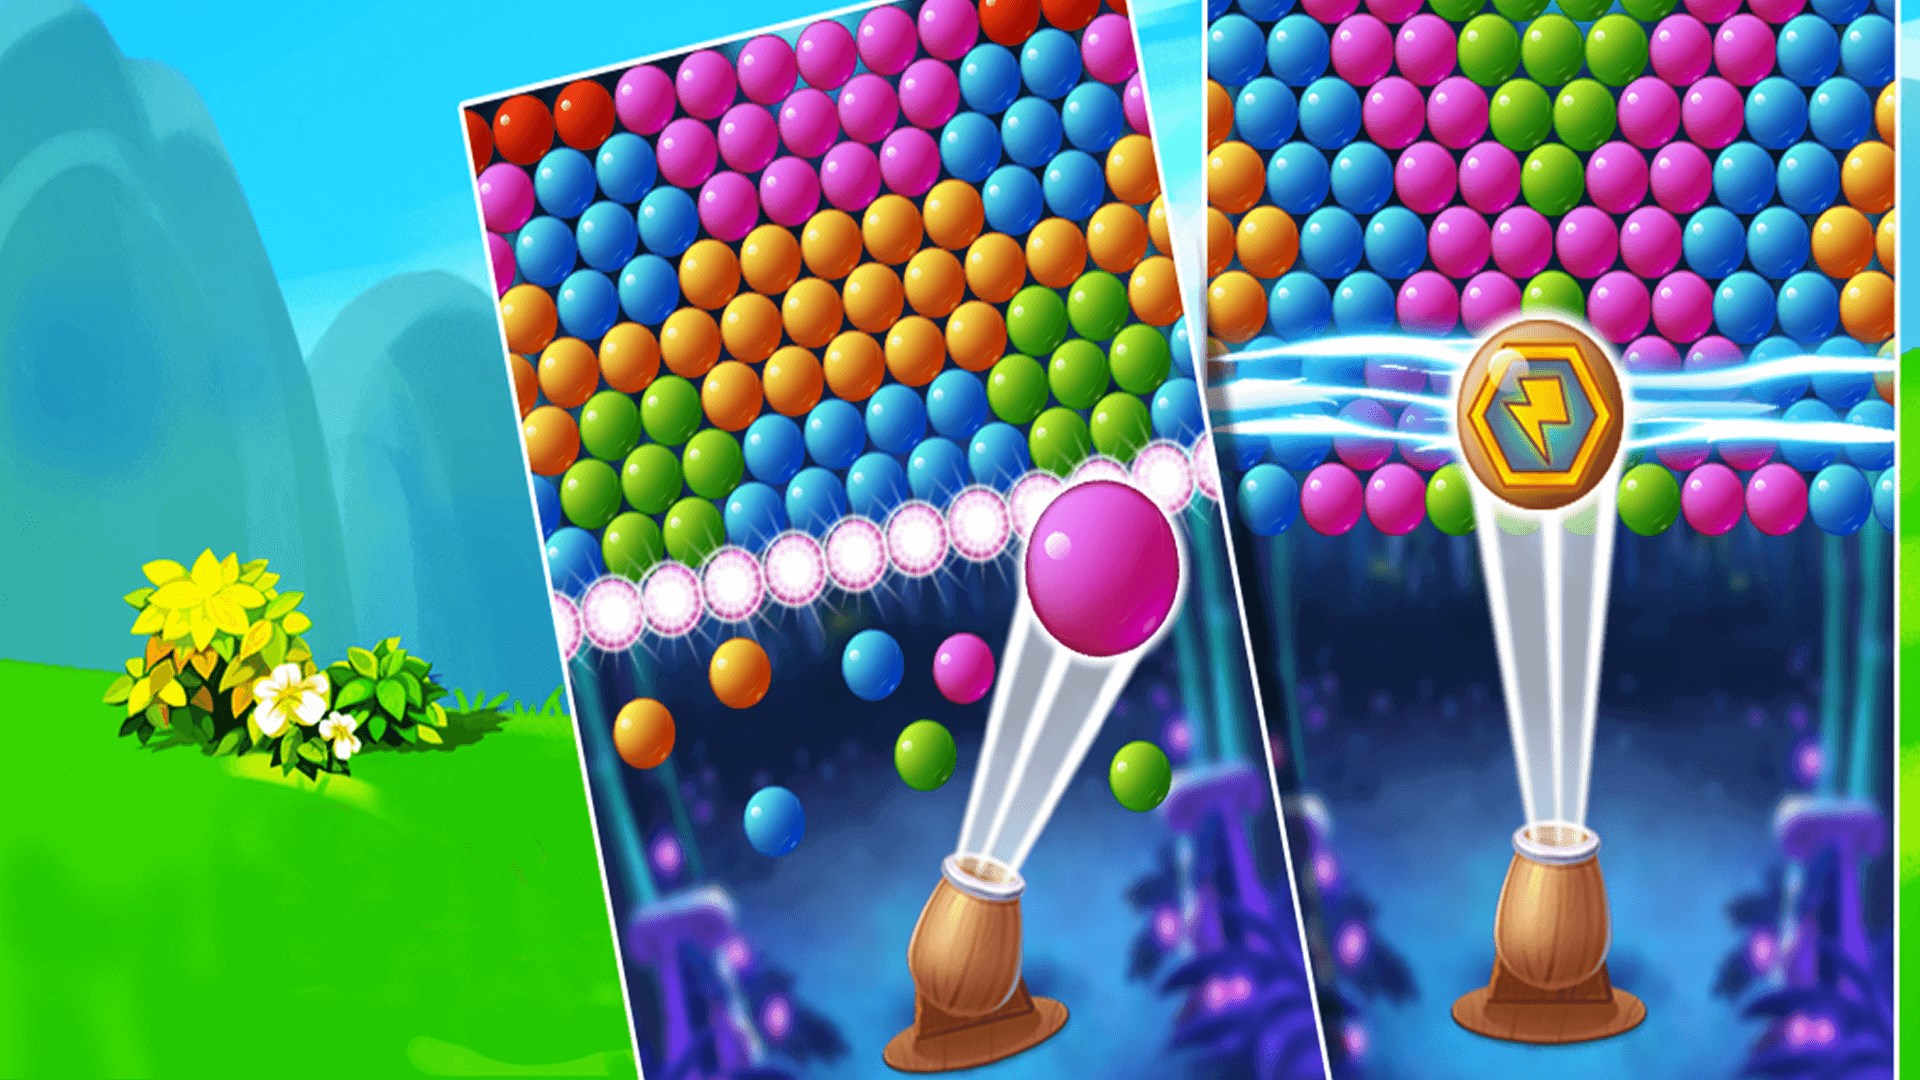 Bubble Candy: Bubble Shooting on the App Store